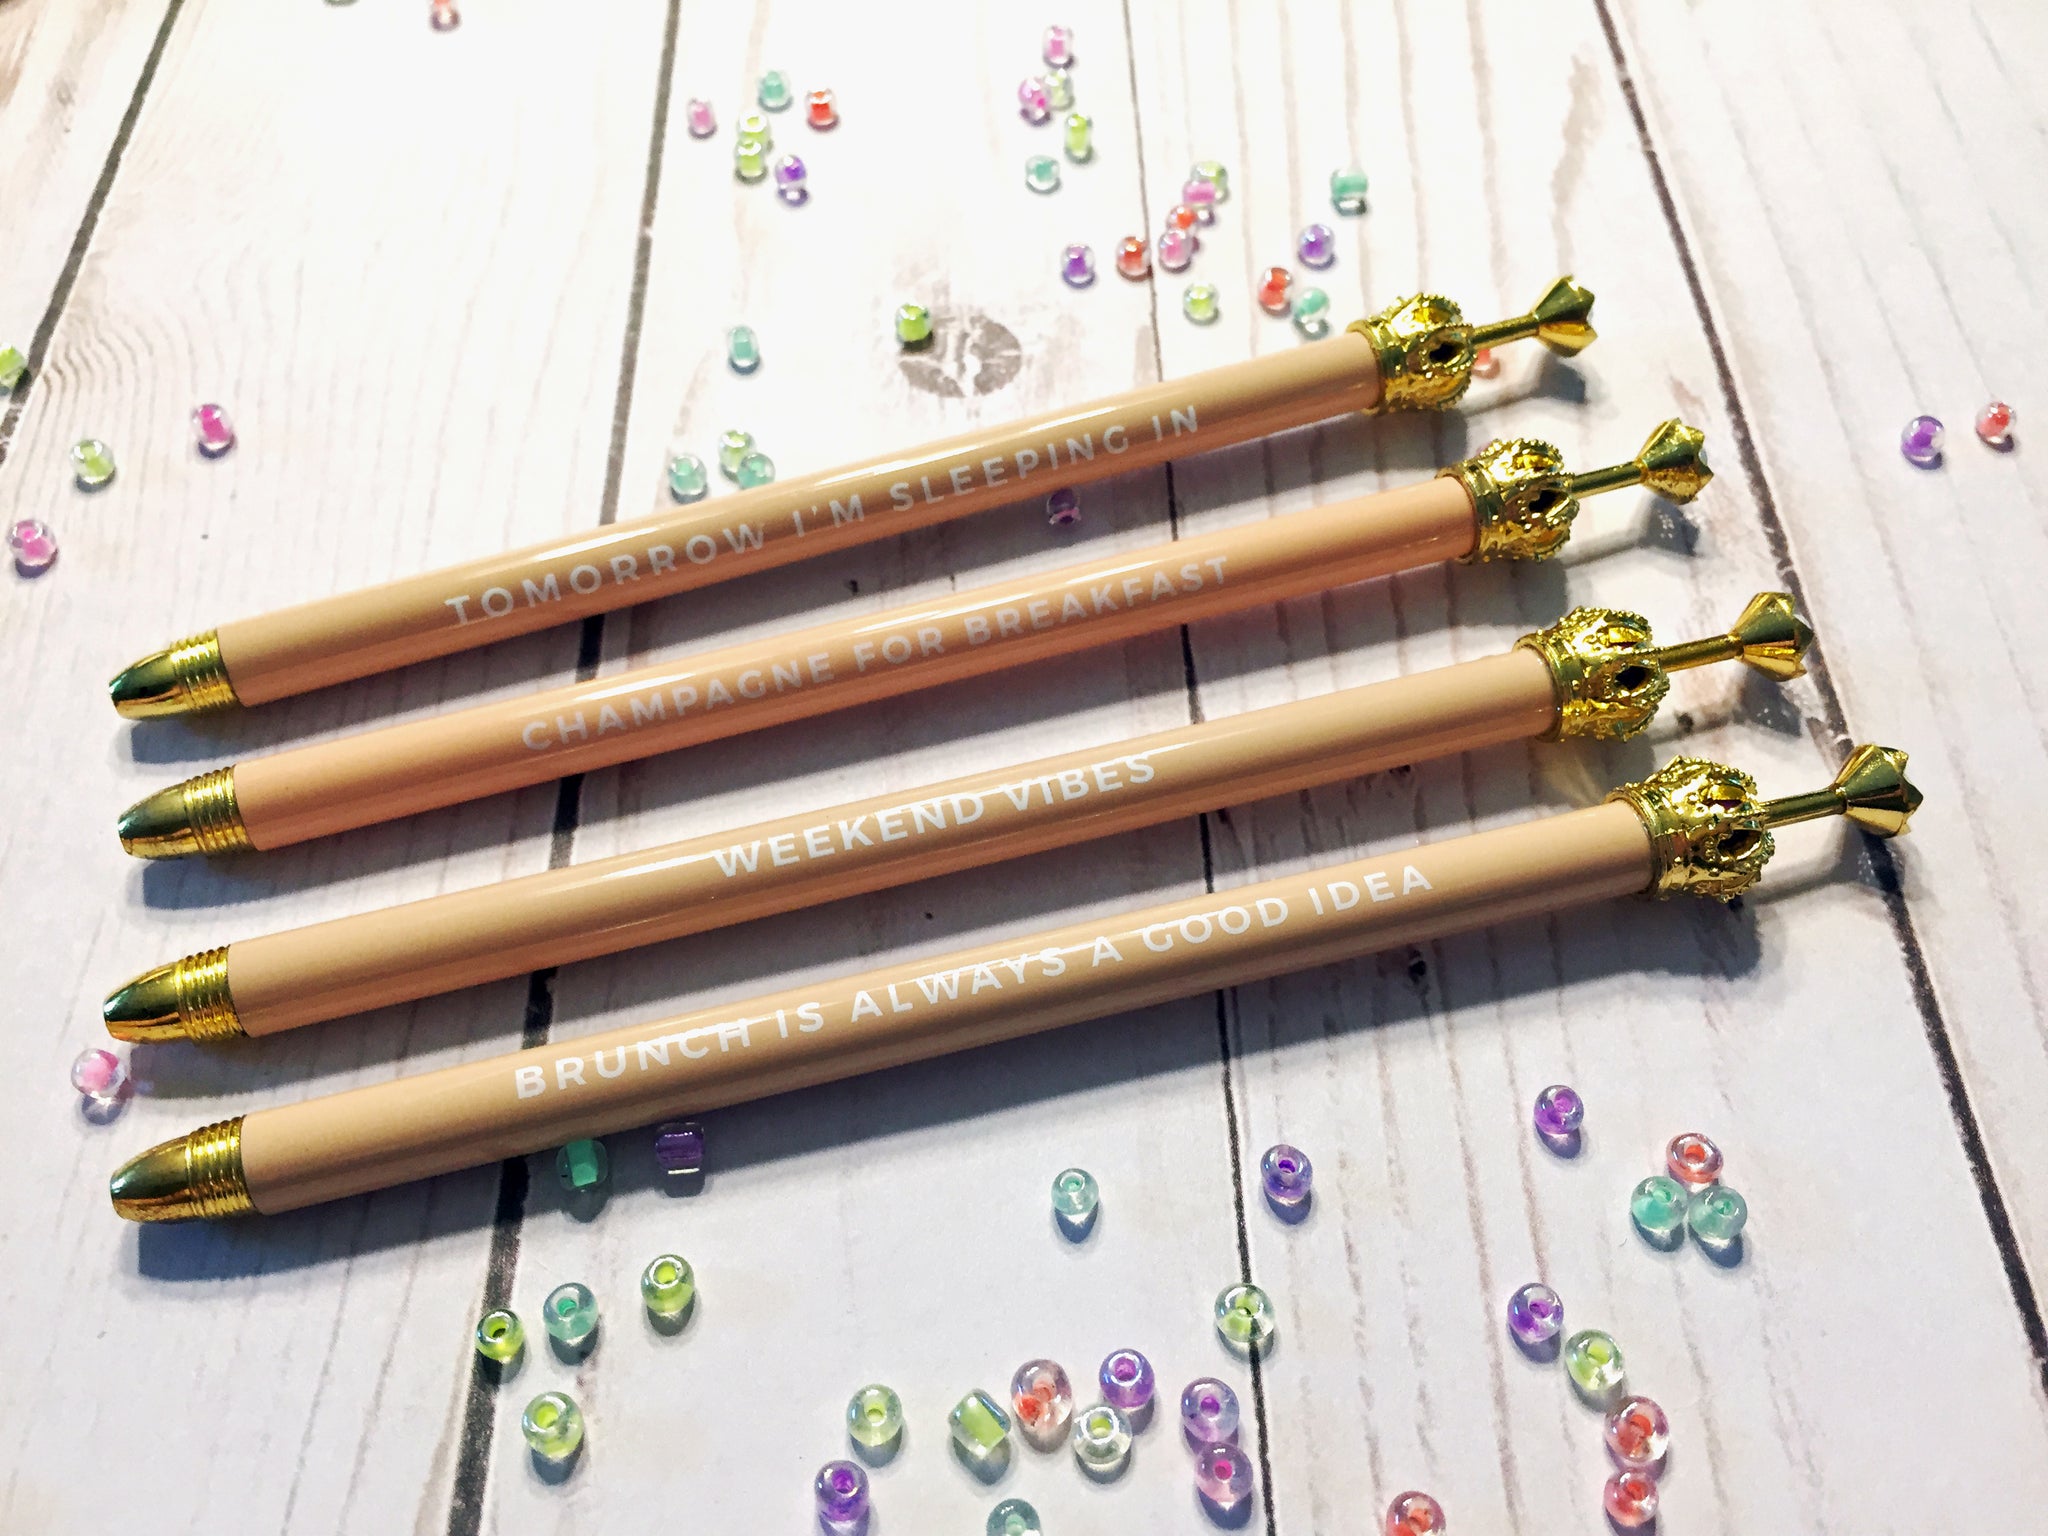 Blush Crown Ballpoint Pen with Cute Mantra - Scarlette Dove